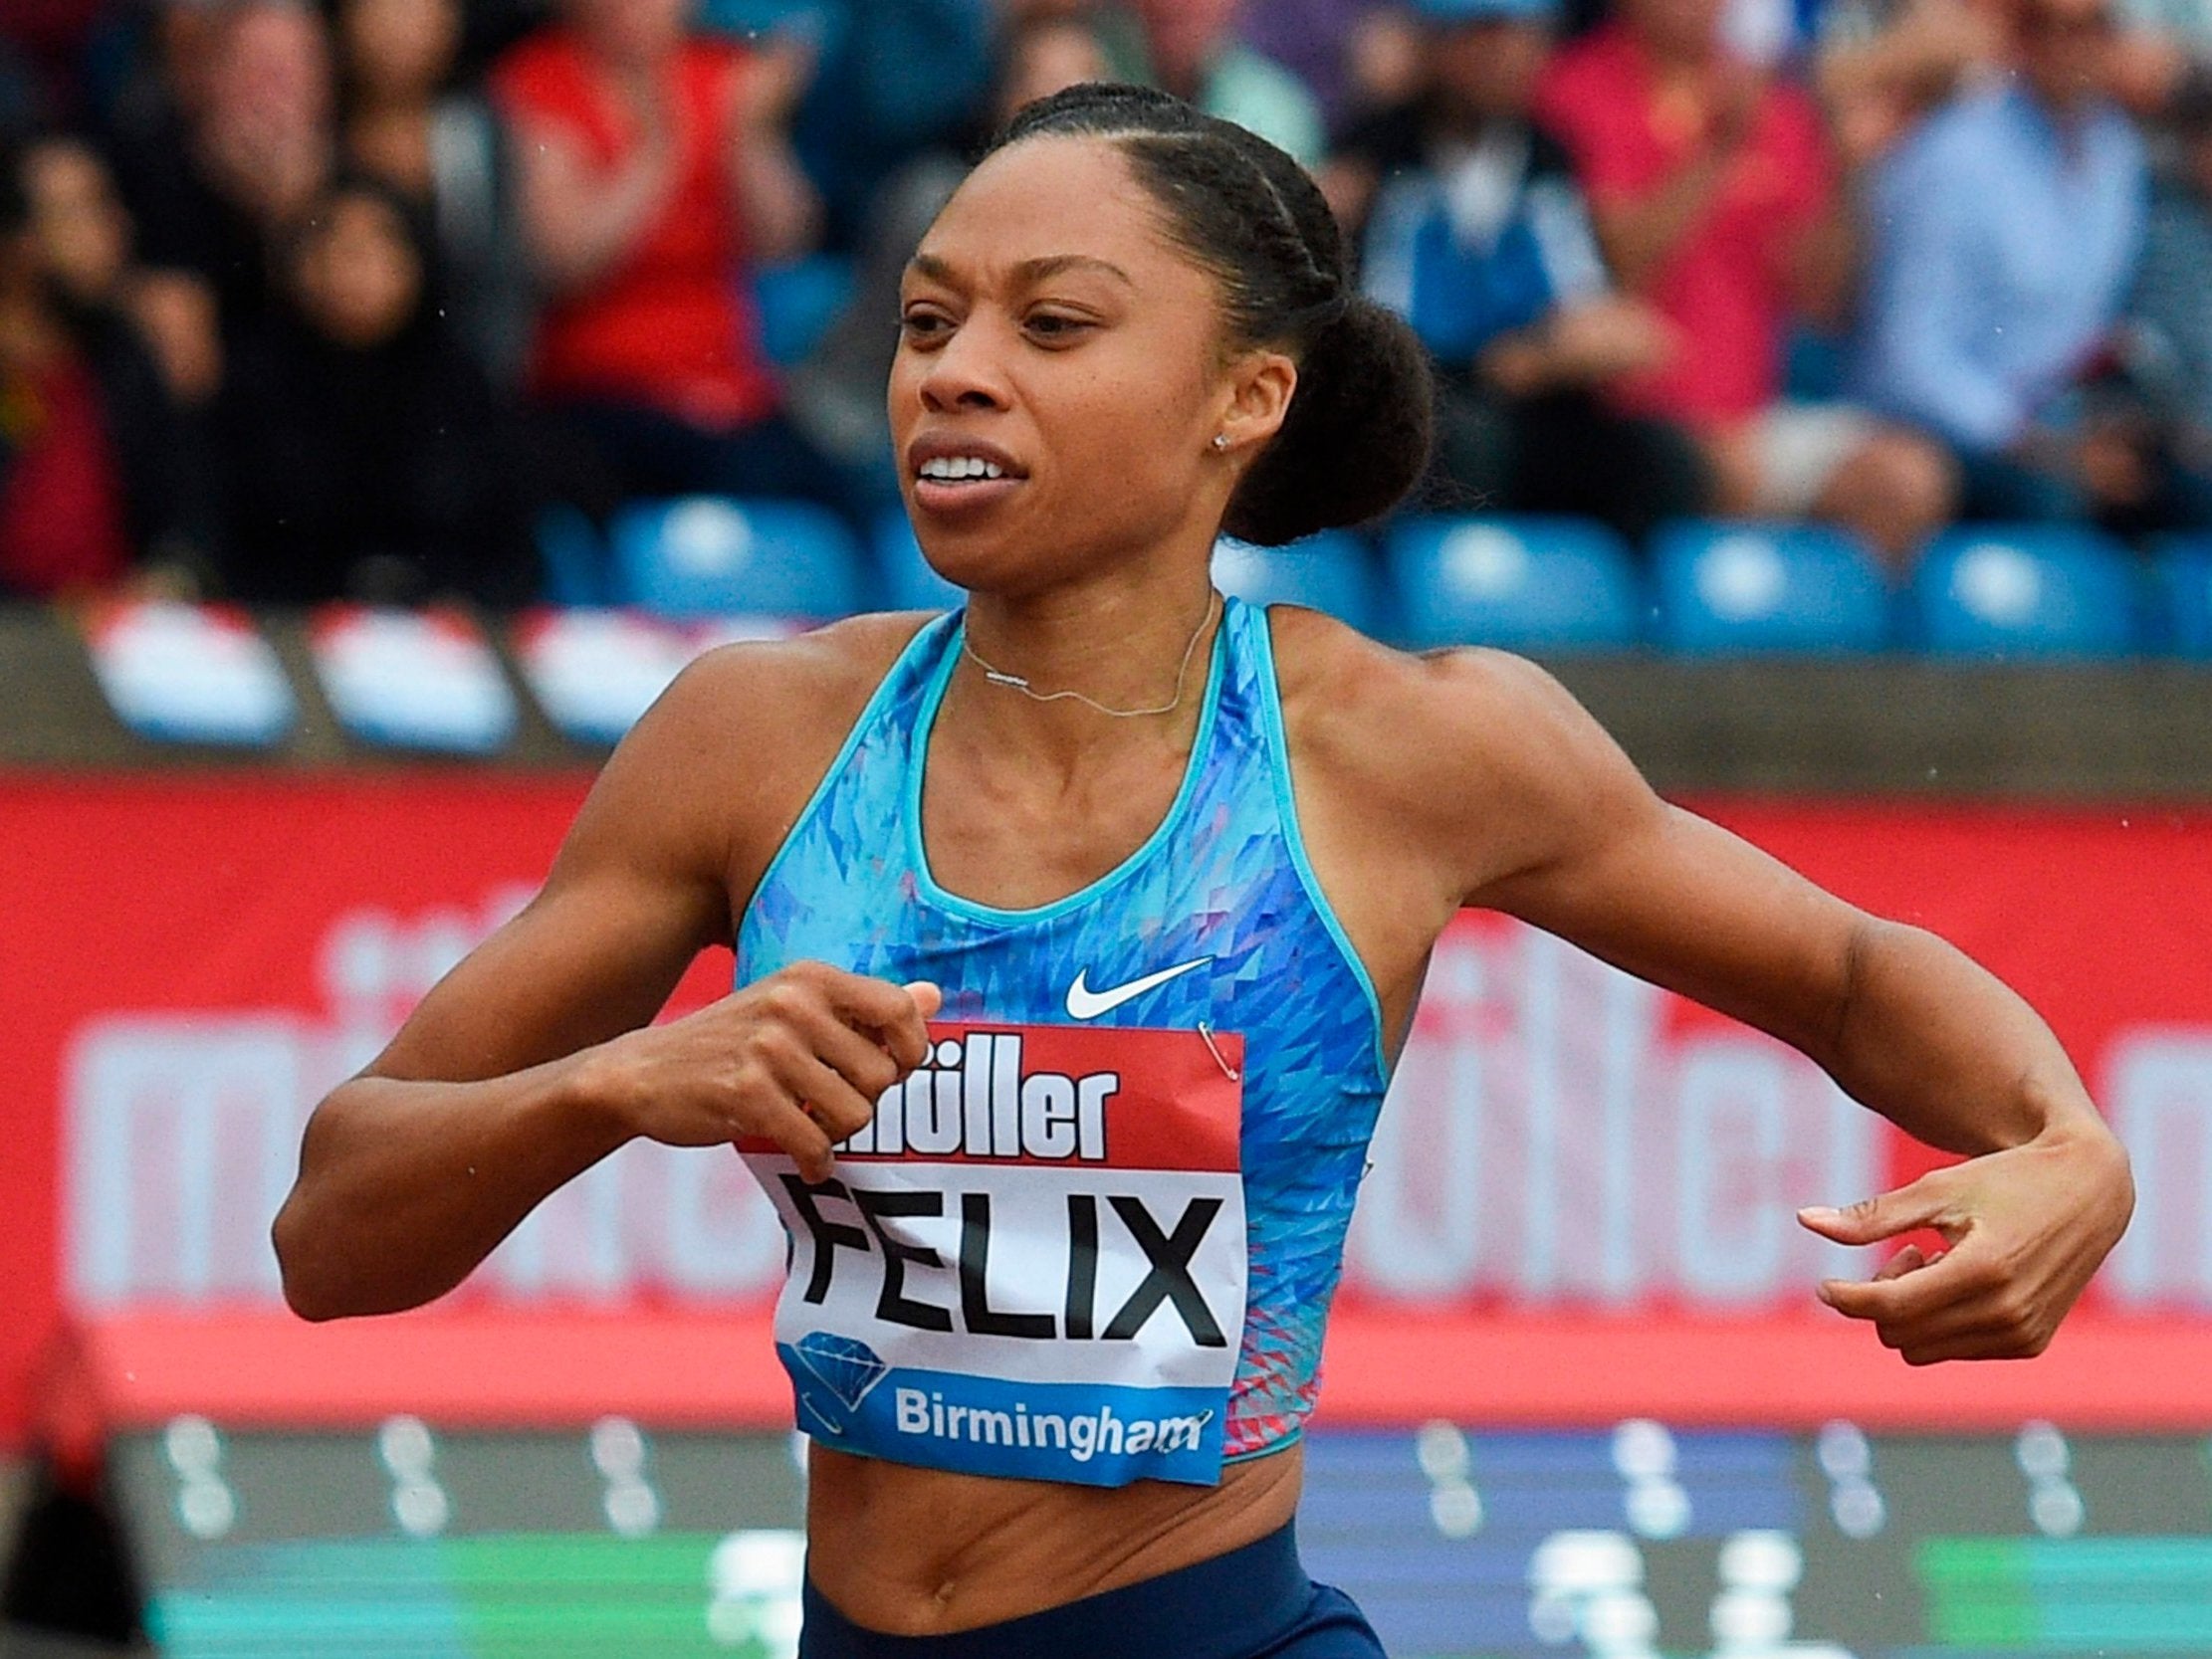 Felix competed last season while pregnant with her daughter Camryn